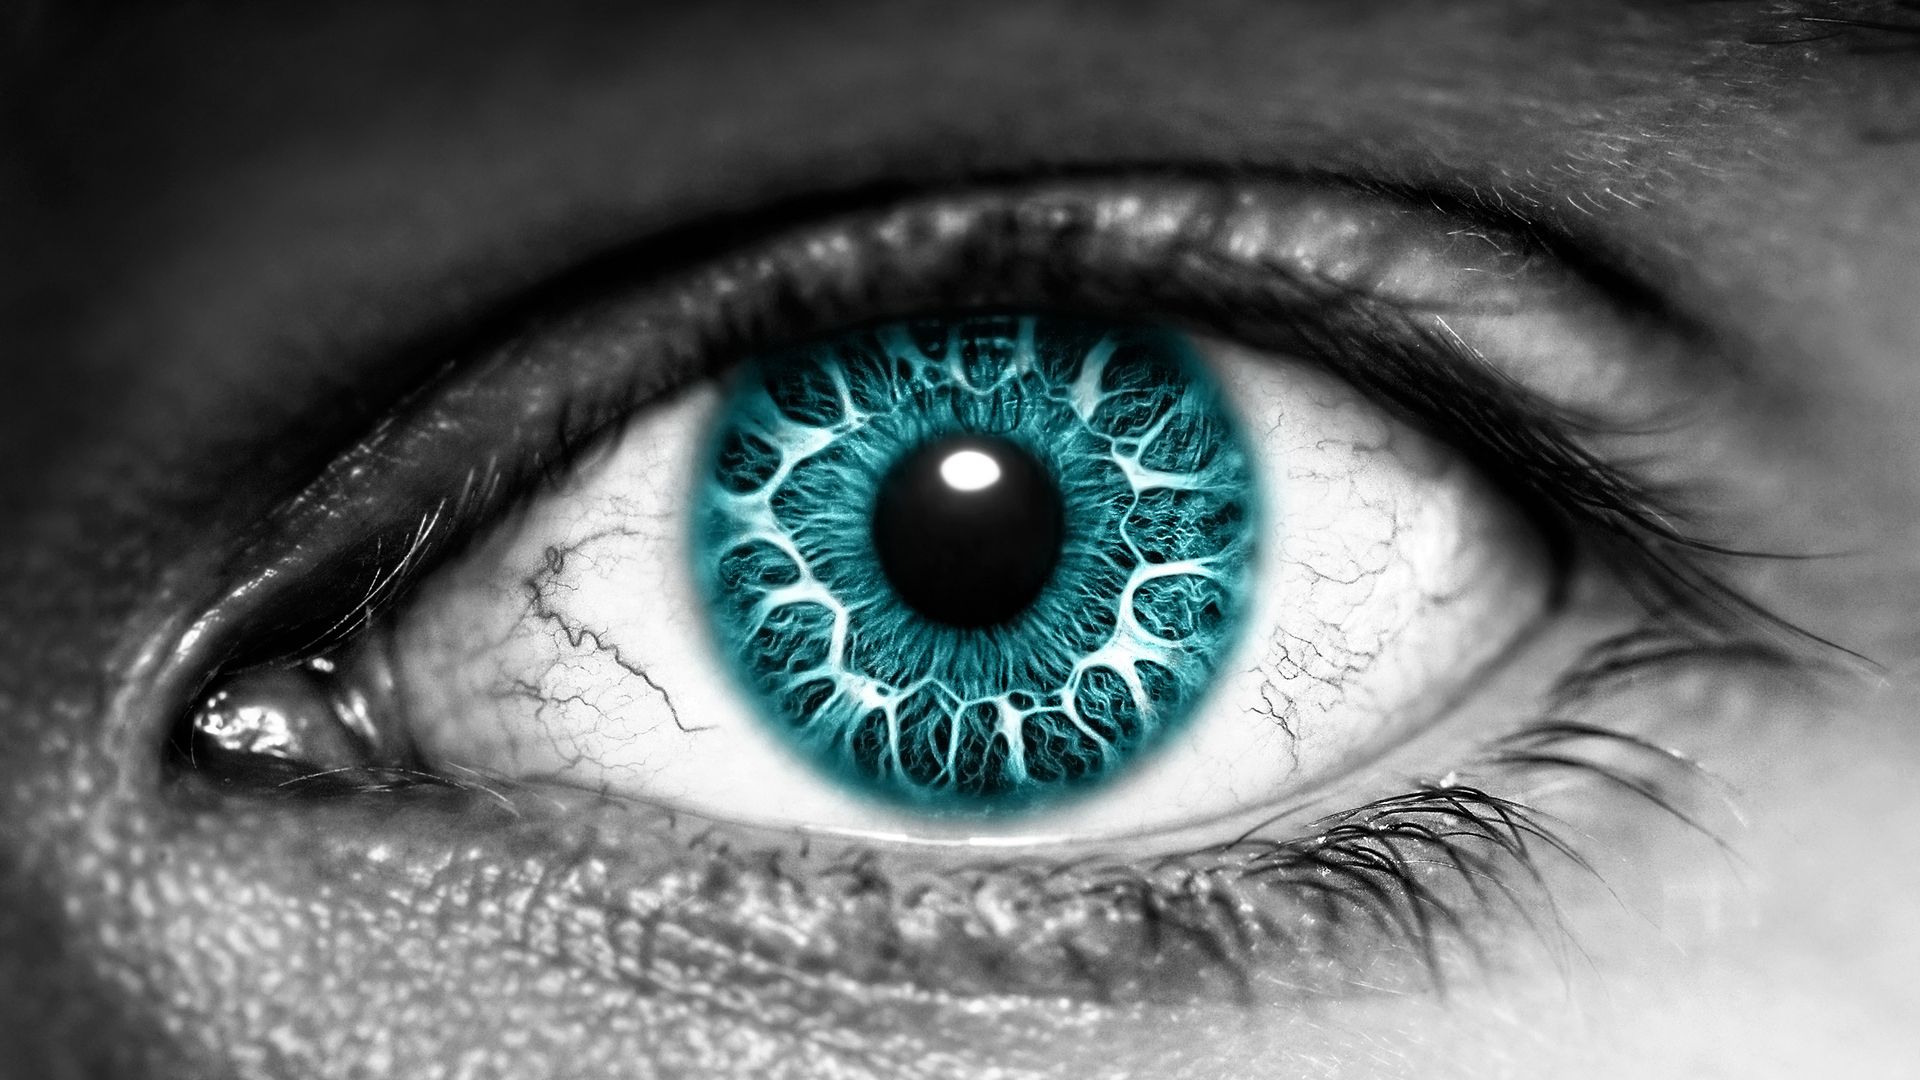 3D Eye With Blue Eyeball Wallpaper | HD 3D and Abstract Wallpapers ...